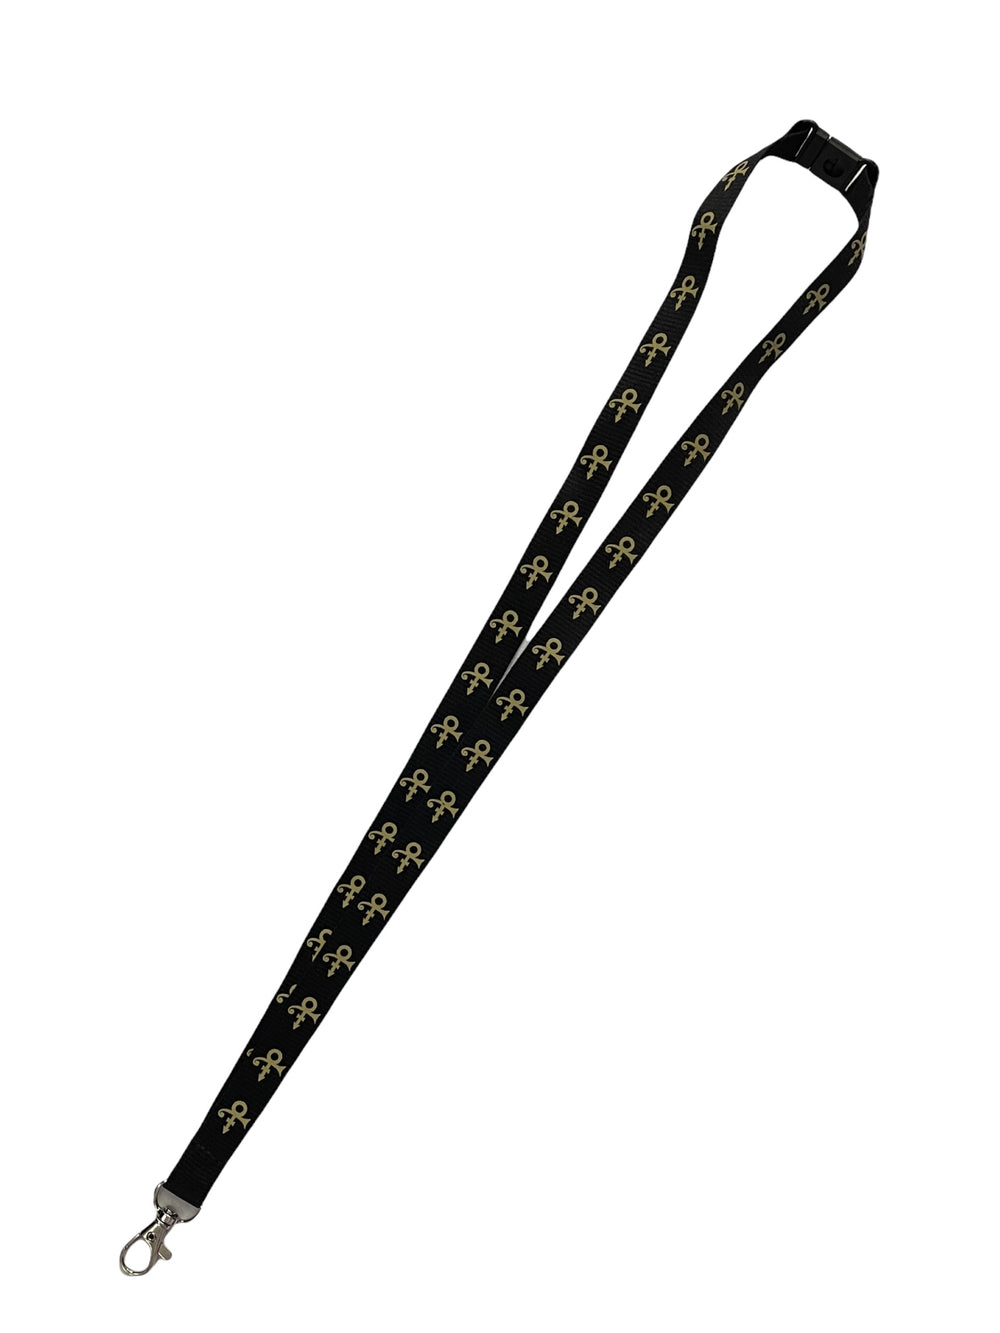 Prince – Official & Xclusive Gold Love Symbol Estate Authorised Lanyard